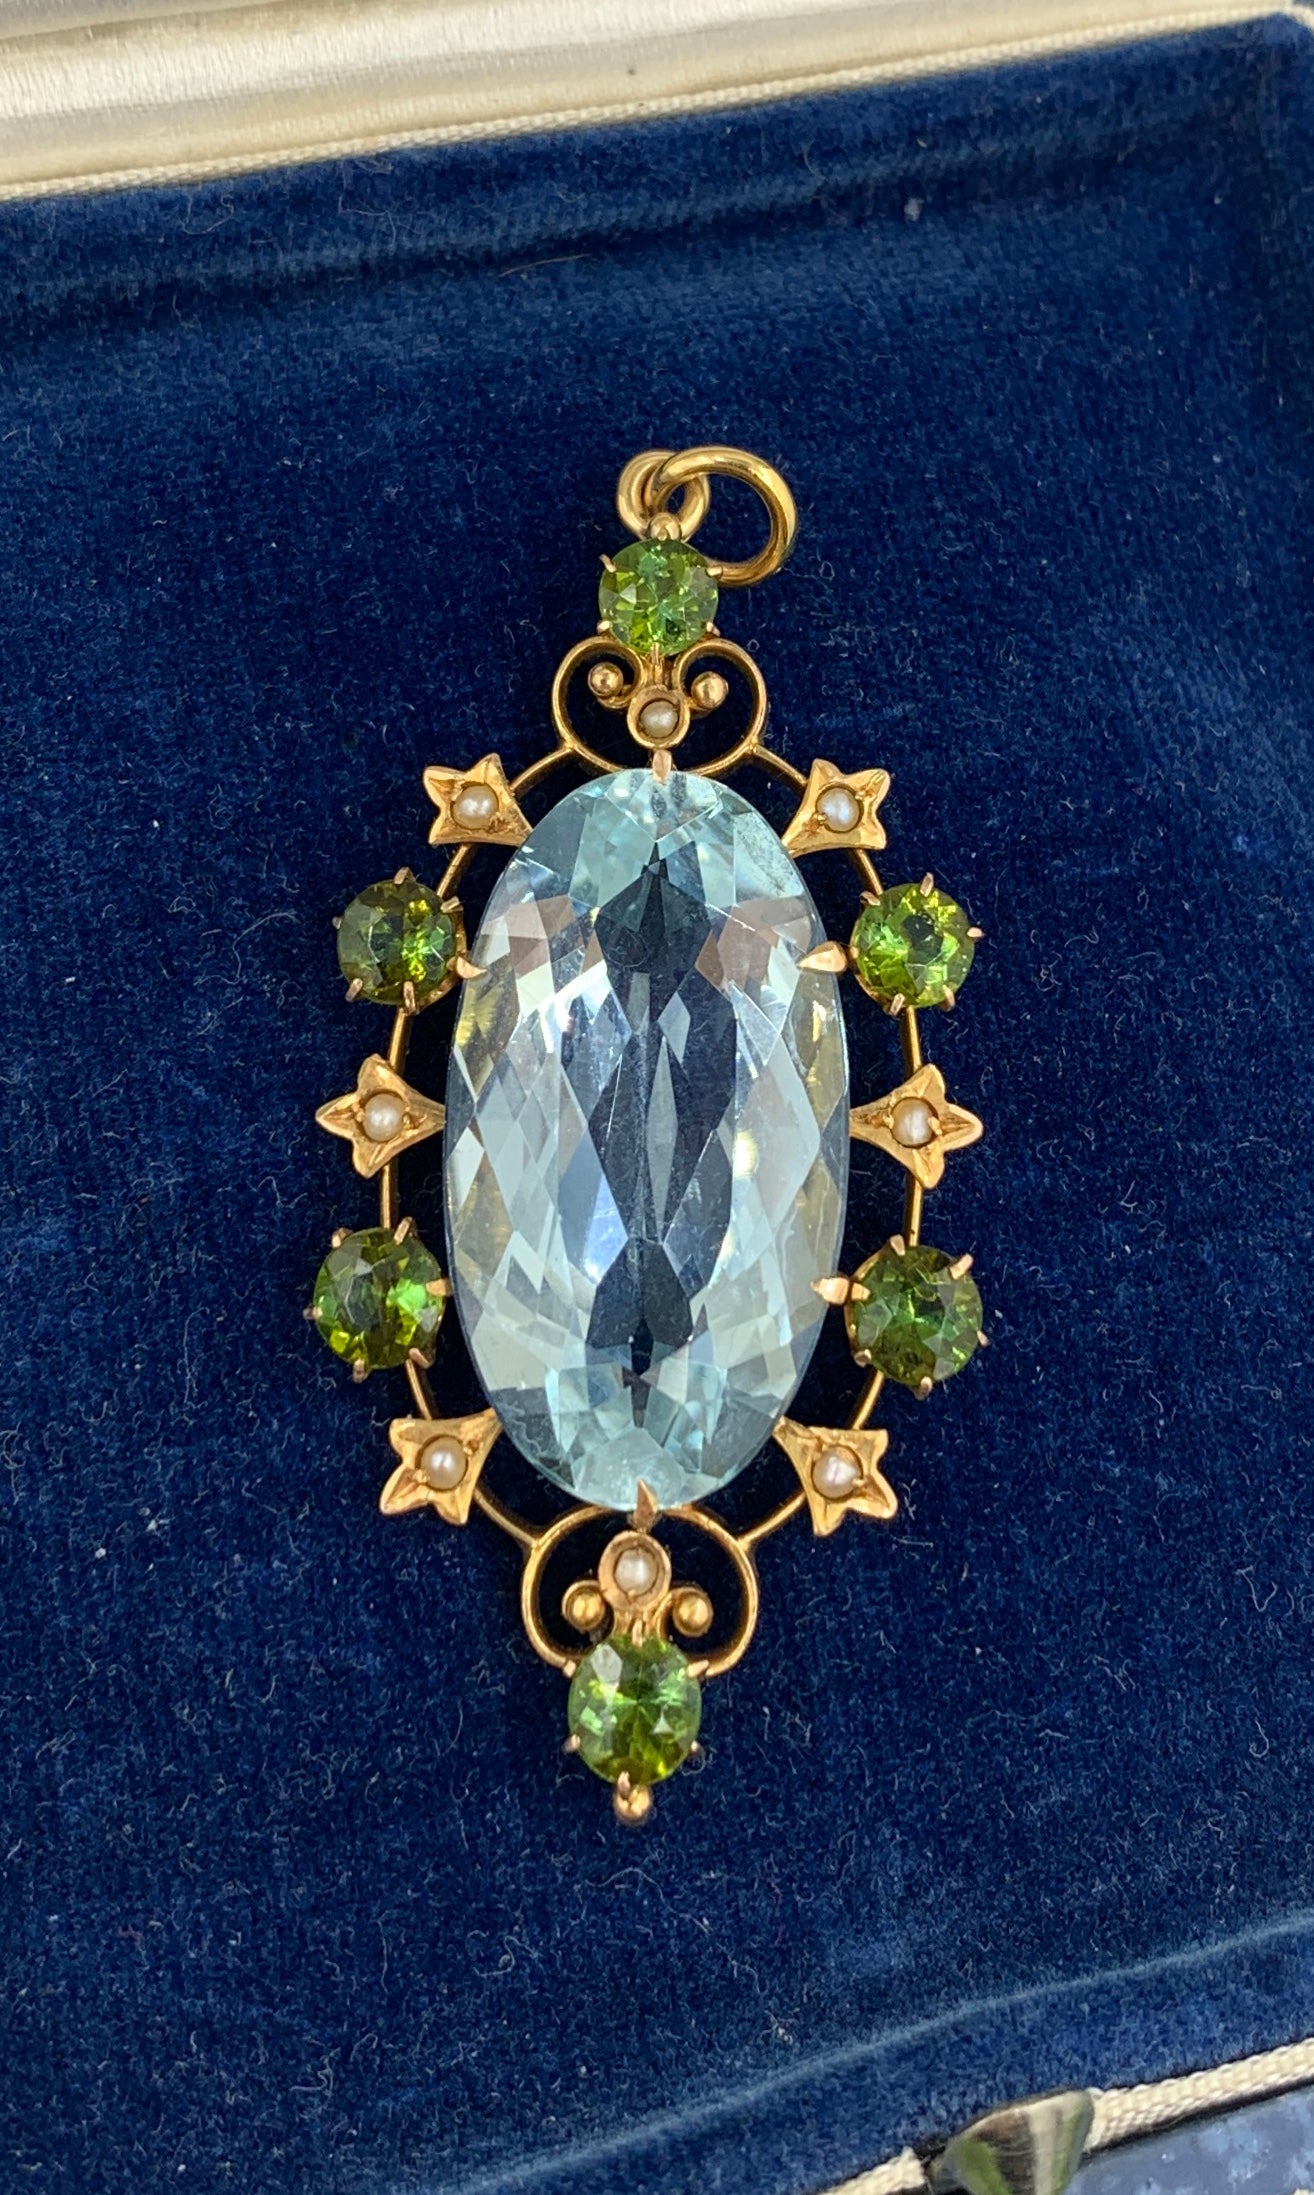 We are so delighted to have this extraordinary antique Art Deco 15 Carat natural Aquamarine and Green Tourmaline and Pearl Pendant in 14 Karat Gold.  The magnificent Aquamarine is 25mm long and the gem has an exquisite oval shape, fine blue color